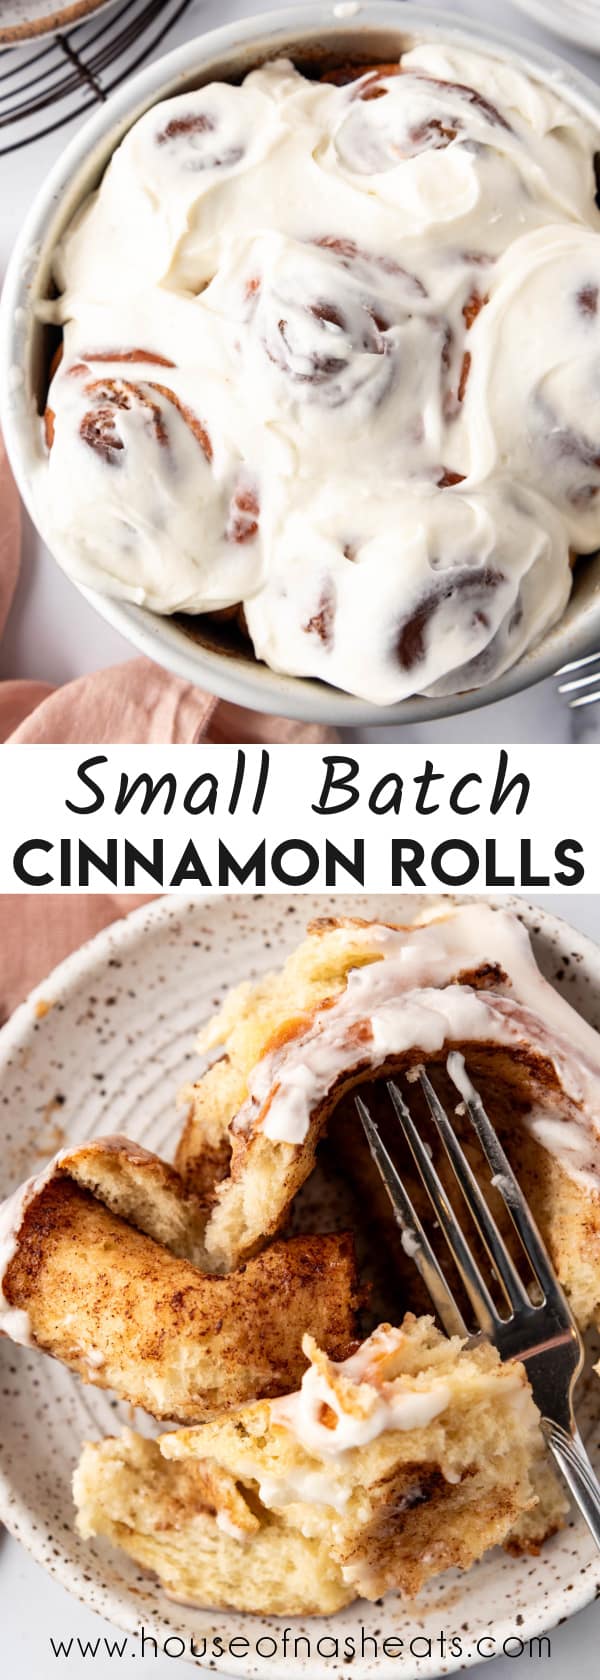 A collage of images of small batch cinnamon rolls with text overlay.